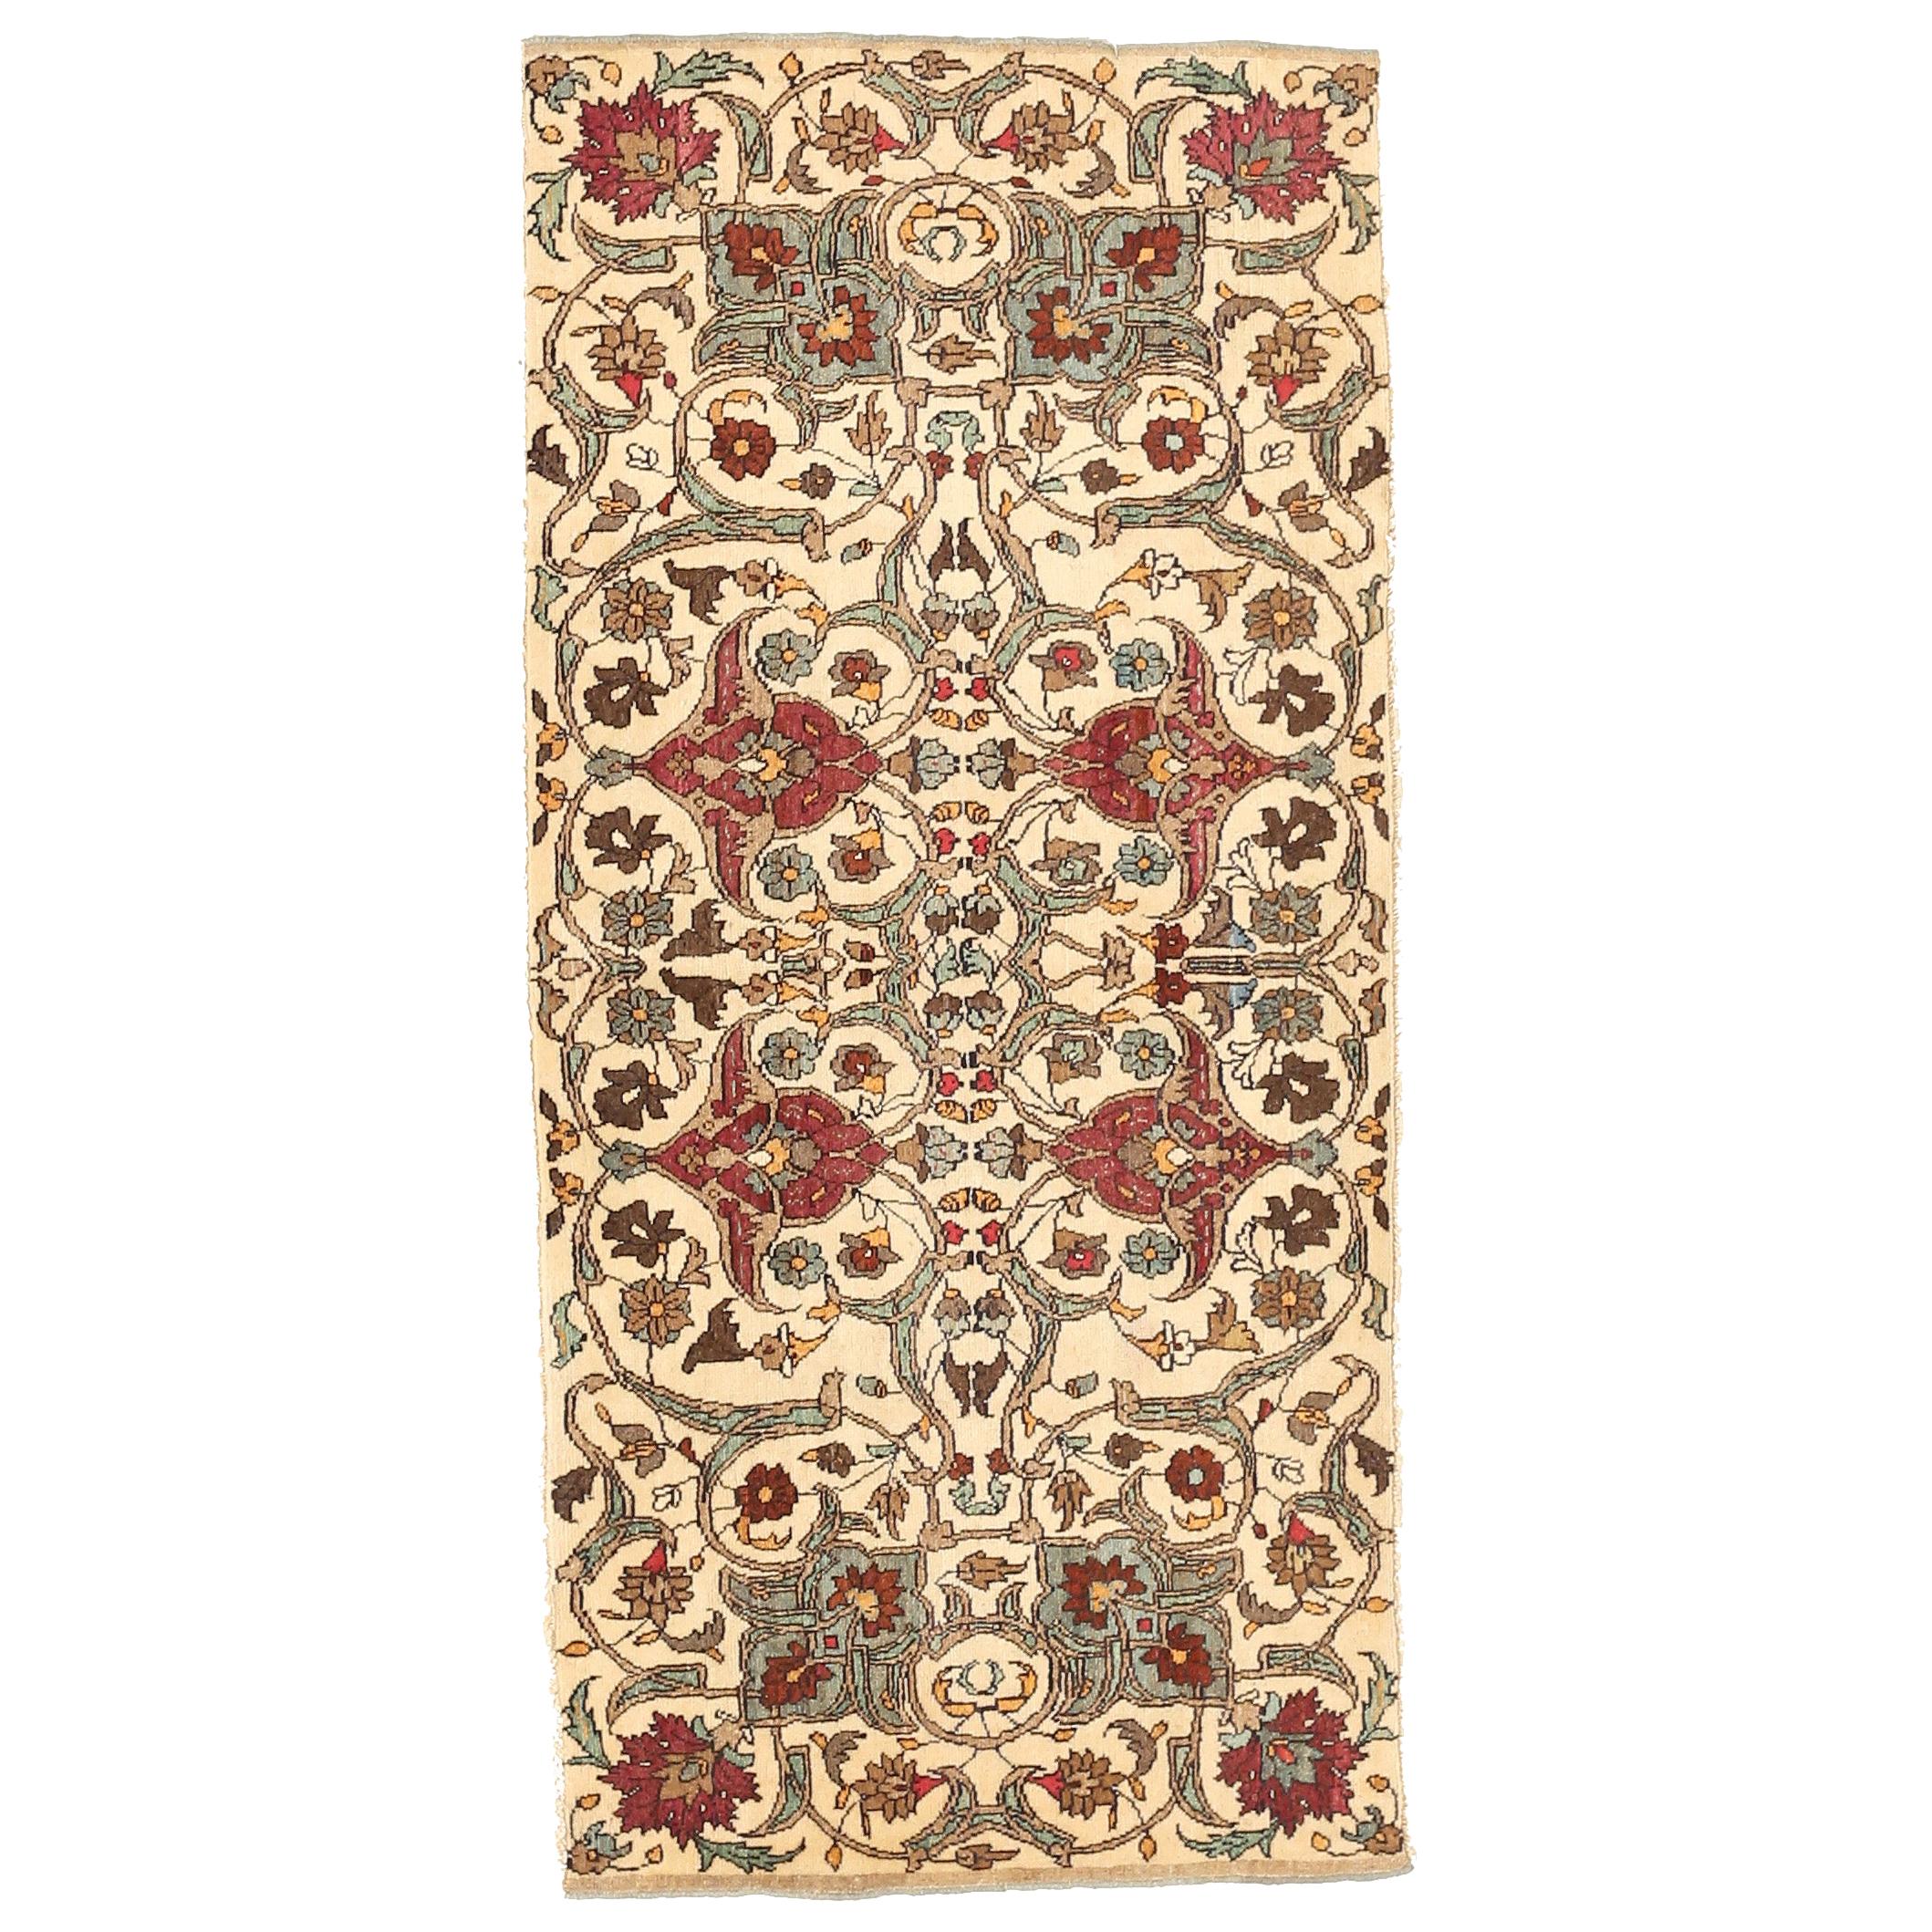 Rare Antique Persian Semnan Rug with Red and Brown Floral Details on Ivory Field